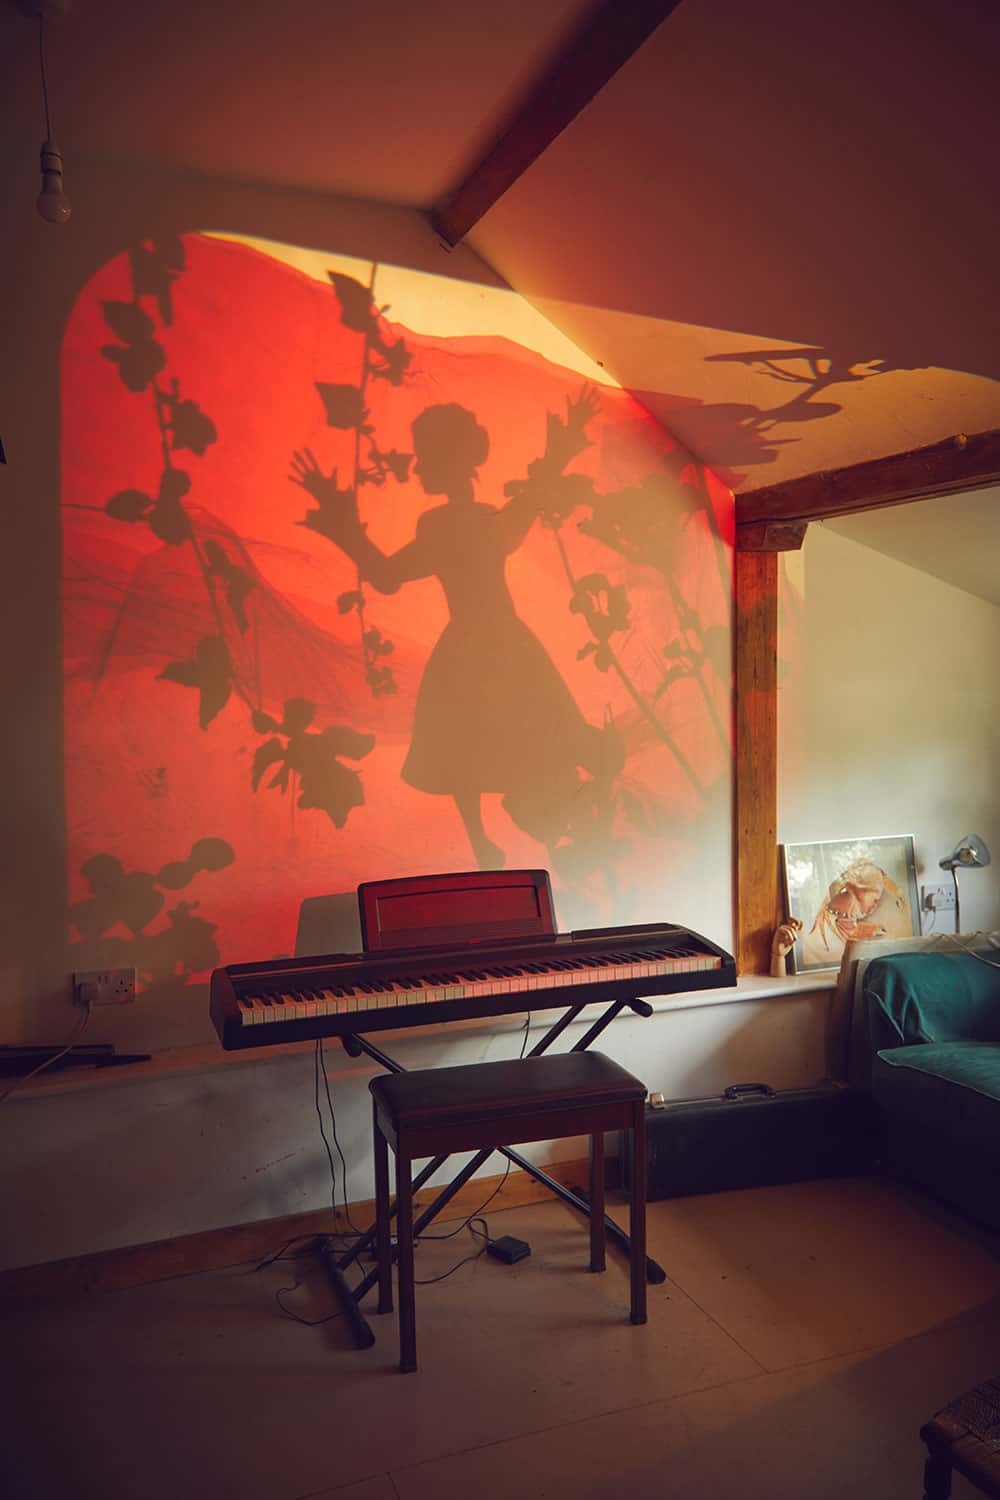 Professor Suzie Hanna's studio showing an animation of a girl with trees on a wall by a piano and stool